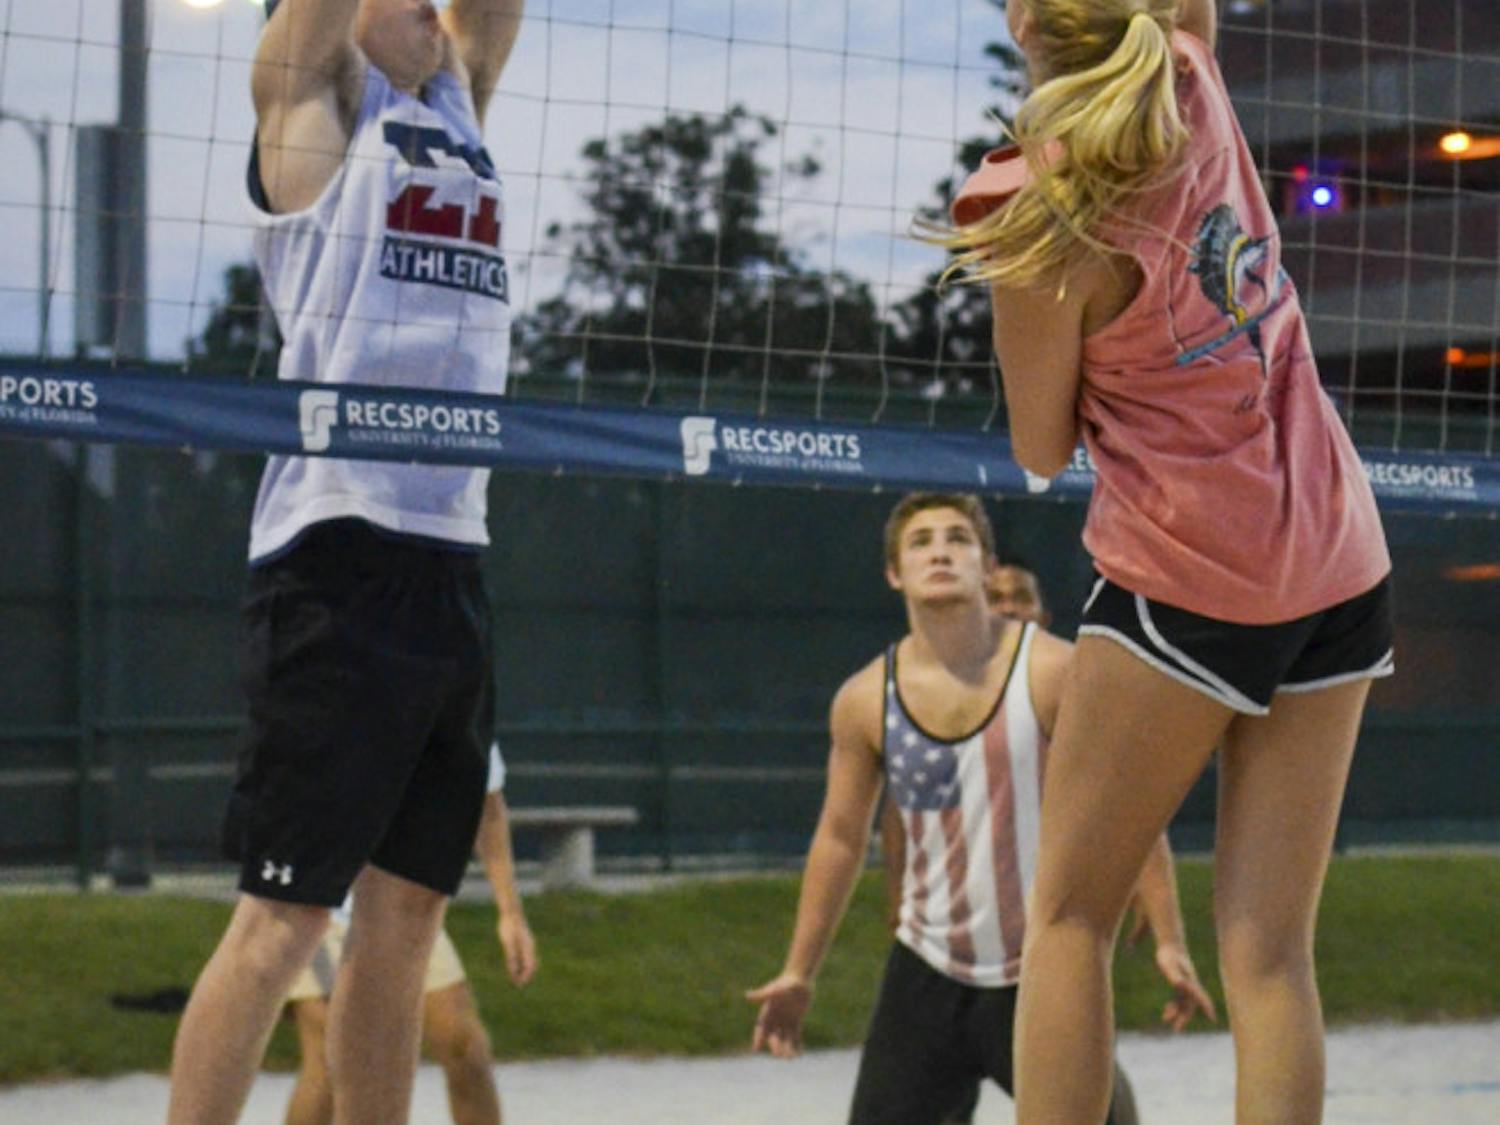 Drew Baker, a 20-year-old UF economics major, prepares to block a spike from 20-year-old aerospace engineer major Shanna Wyatt. The volleyball game was part of “Spike-it-with-Senate,” a charity volleyball tournament.